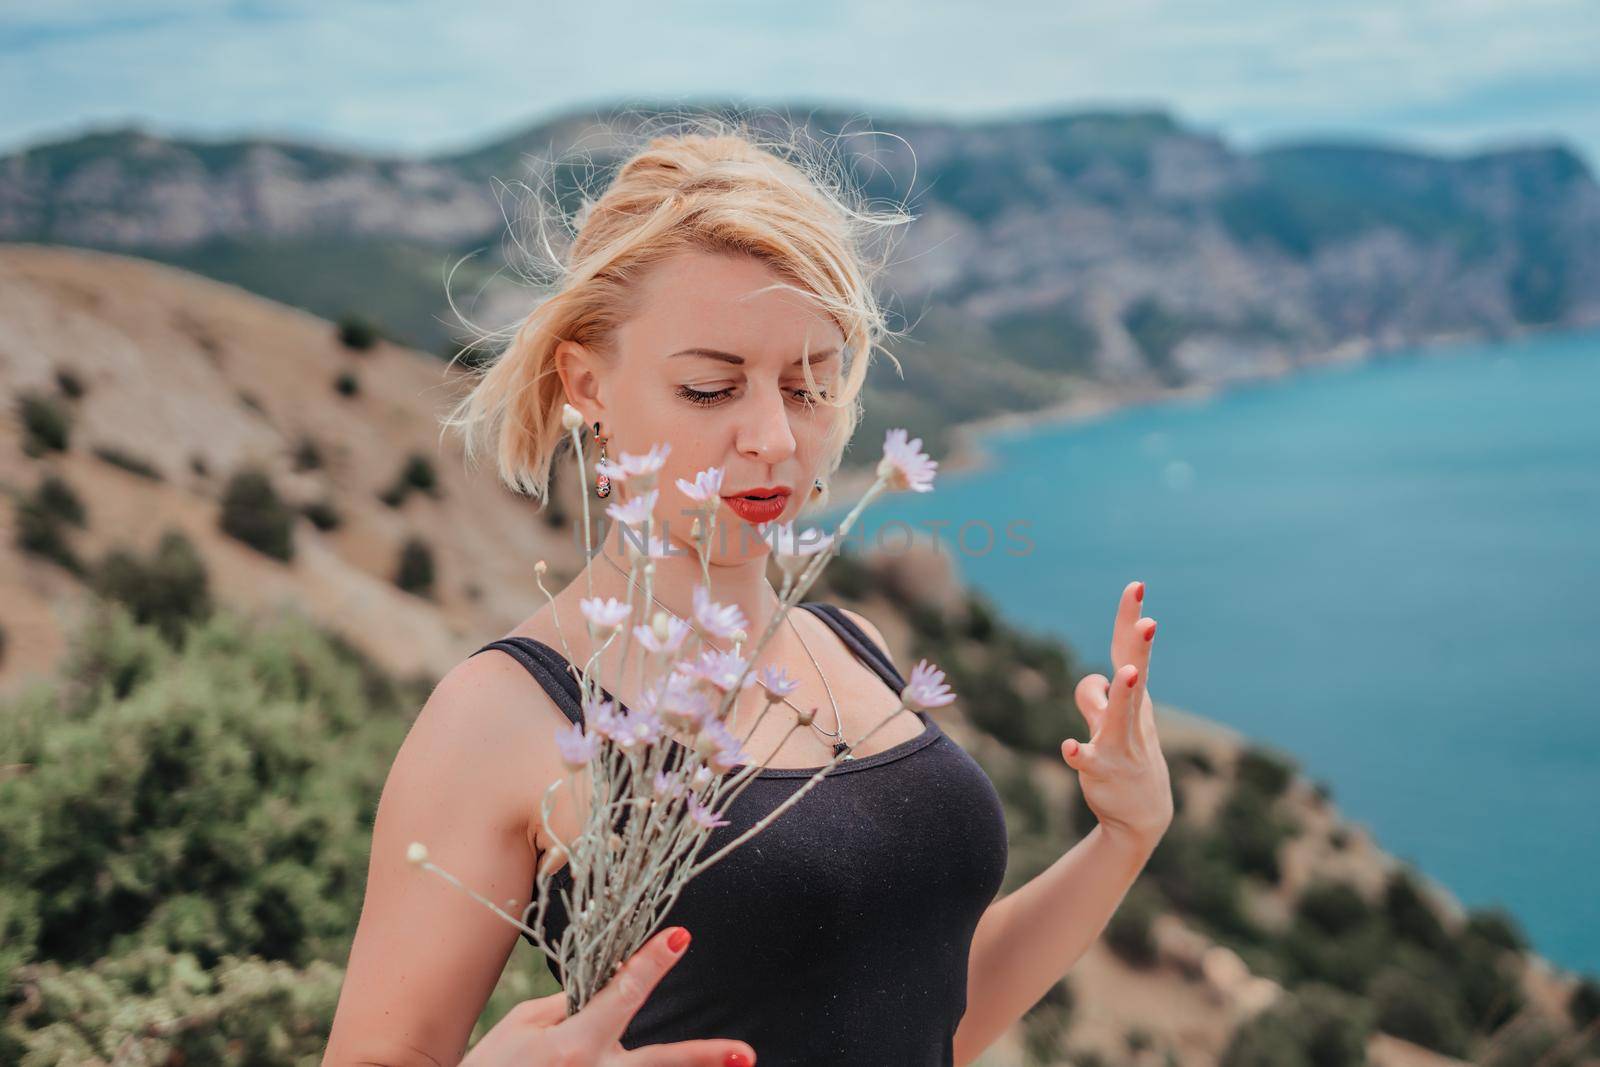 blonde girl with scarlet lipstick and red manicure in a black T-shirt with a bouquet of wildflowers on a background of sea and mountains. she is happy and enjoying wonderful breathtaking landscape.